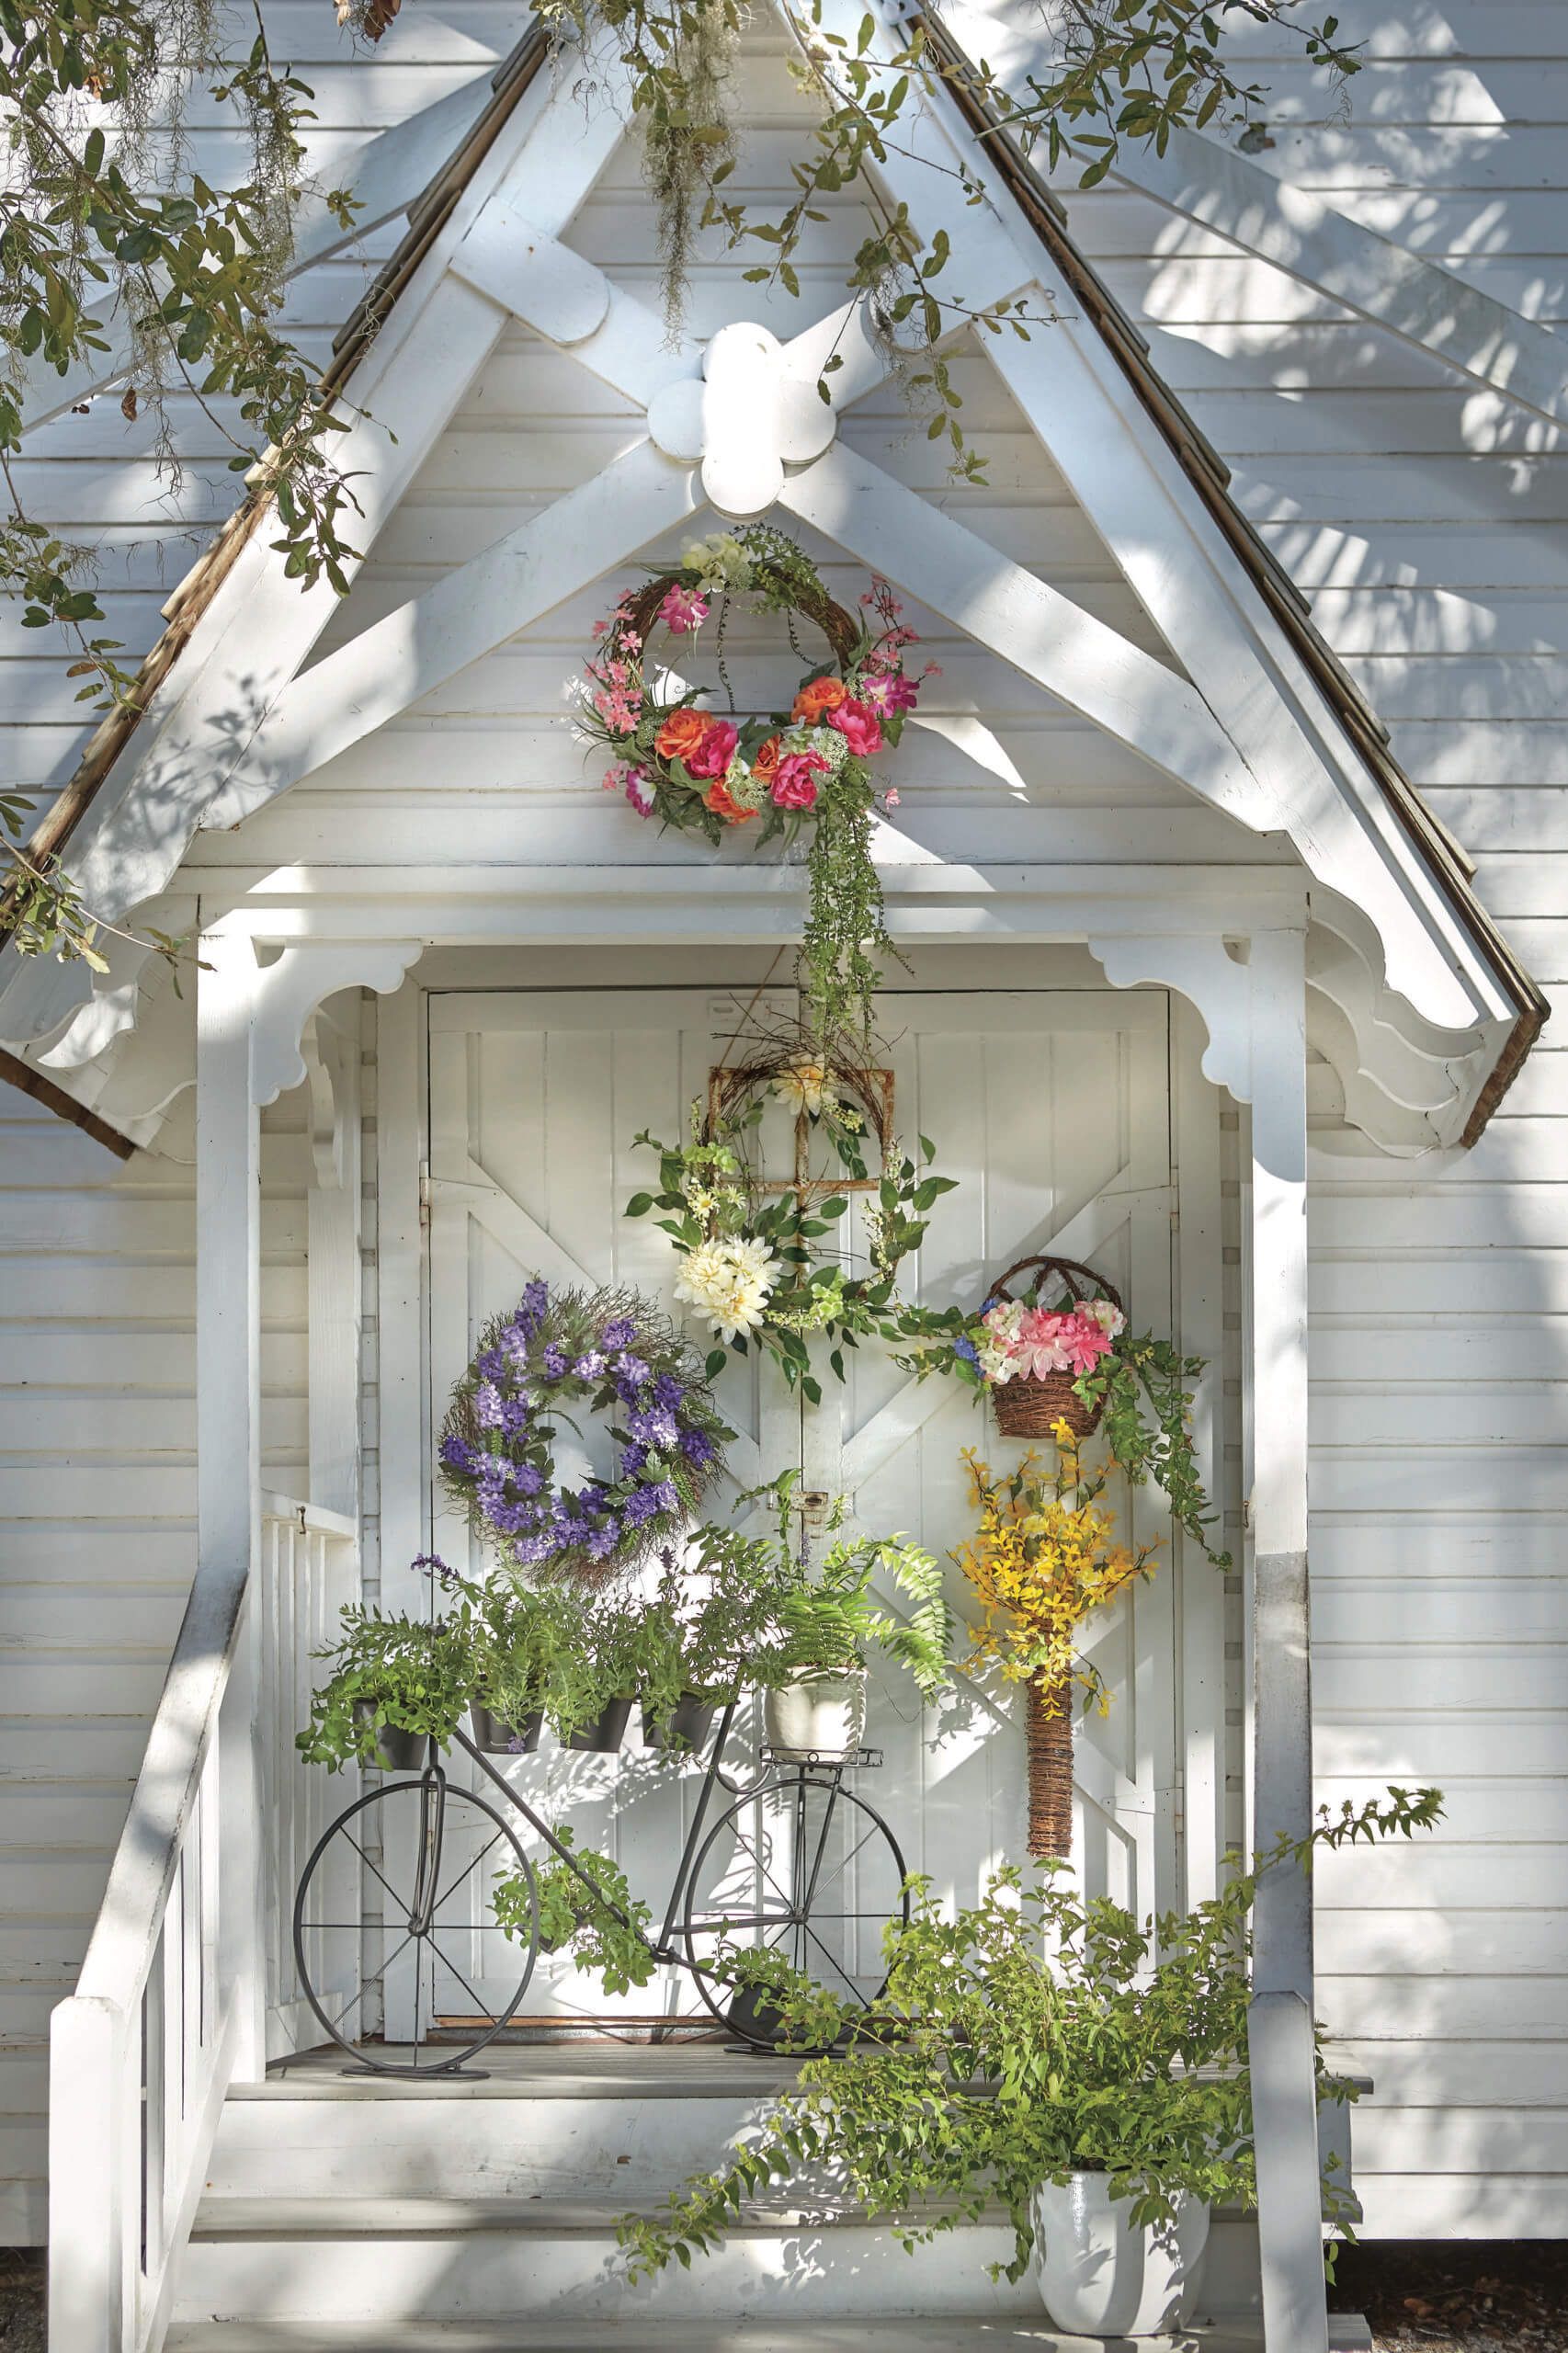 Five colorful Spring wreaths hanging on a white country schoolhouse entrance with an iron bicycle plant stand holding ferns.